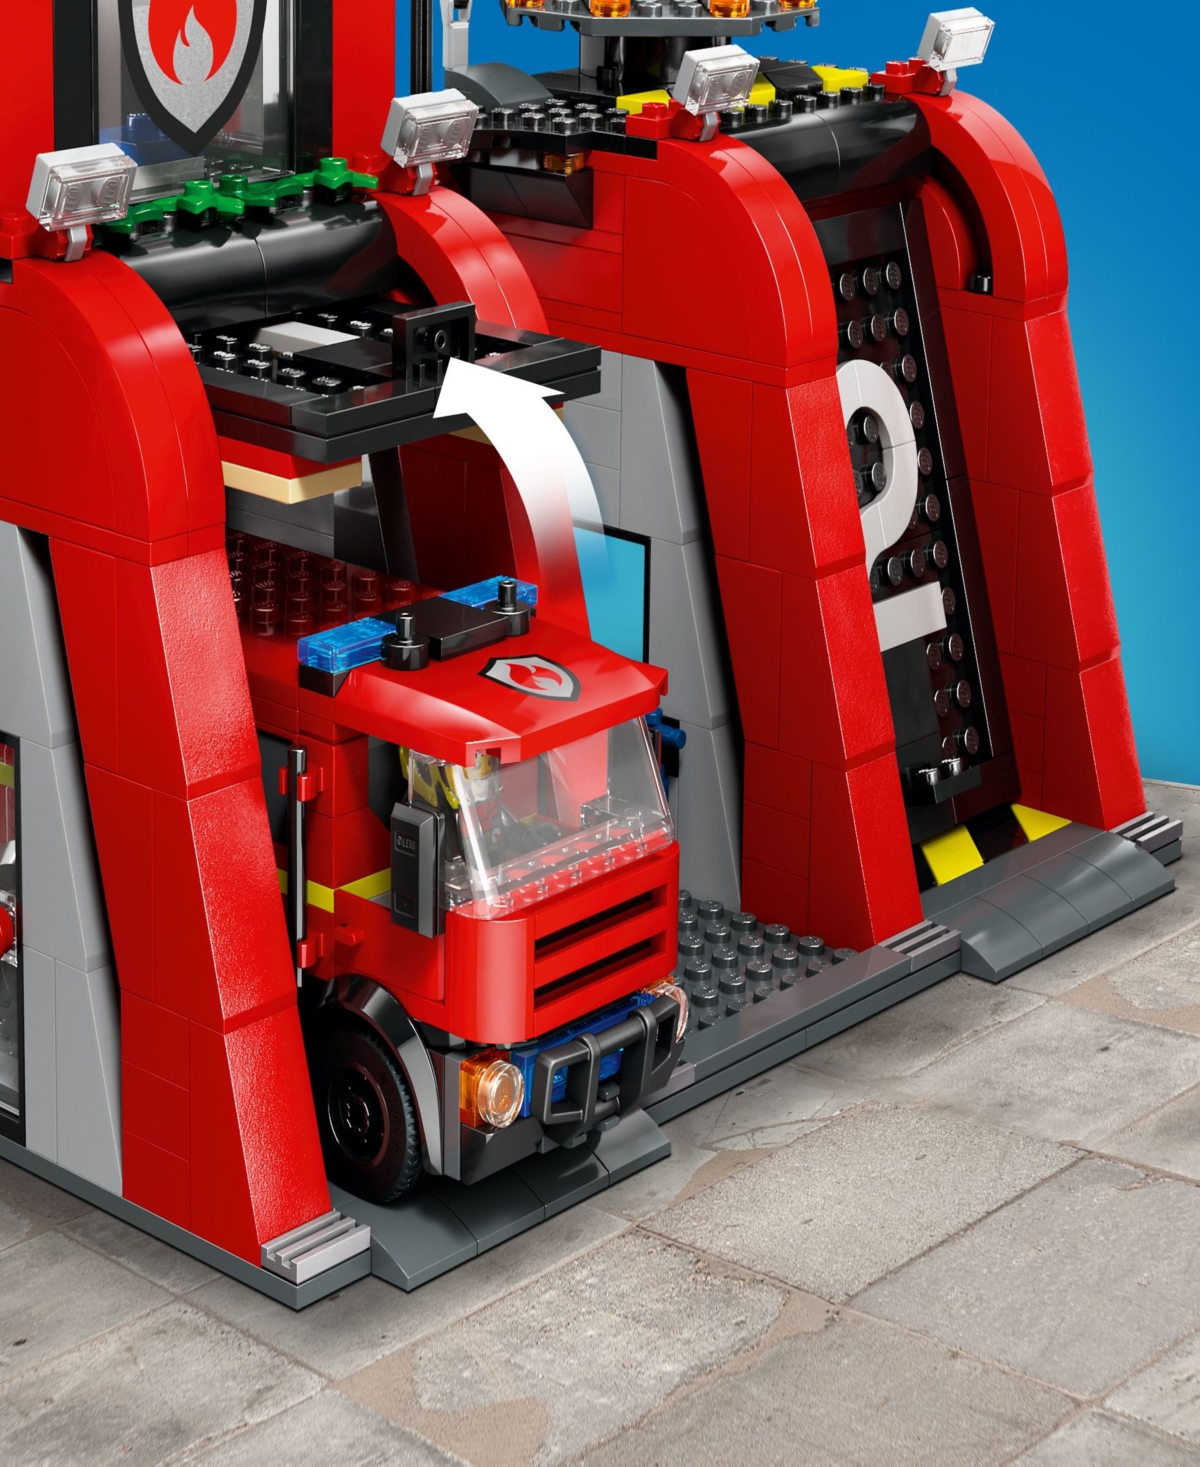 Shop Lego City Fire Station With Fire Truck Pretend Play Toy 60414, 843 Pieces In Multicolor